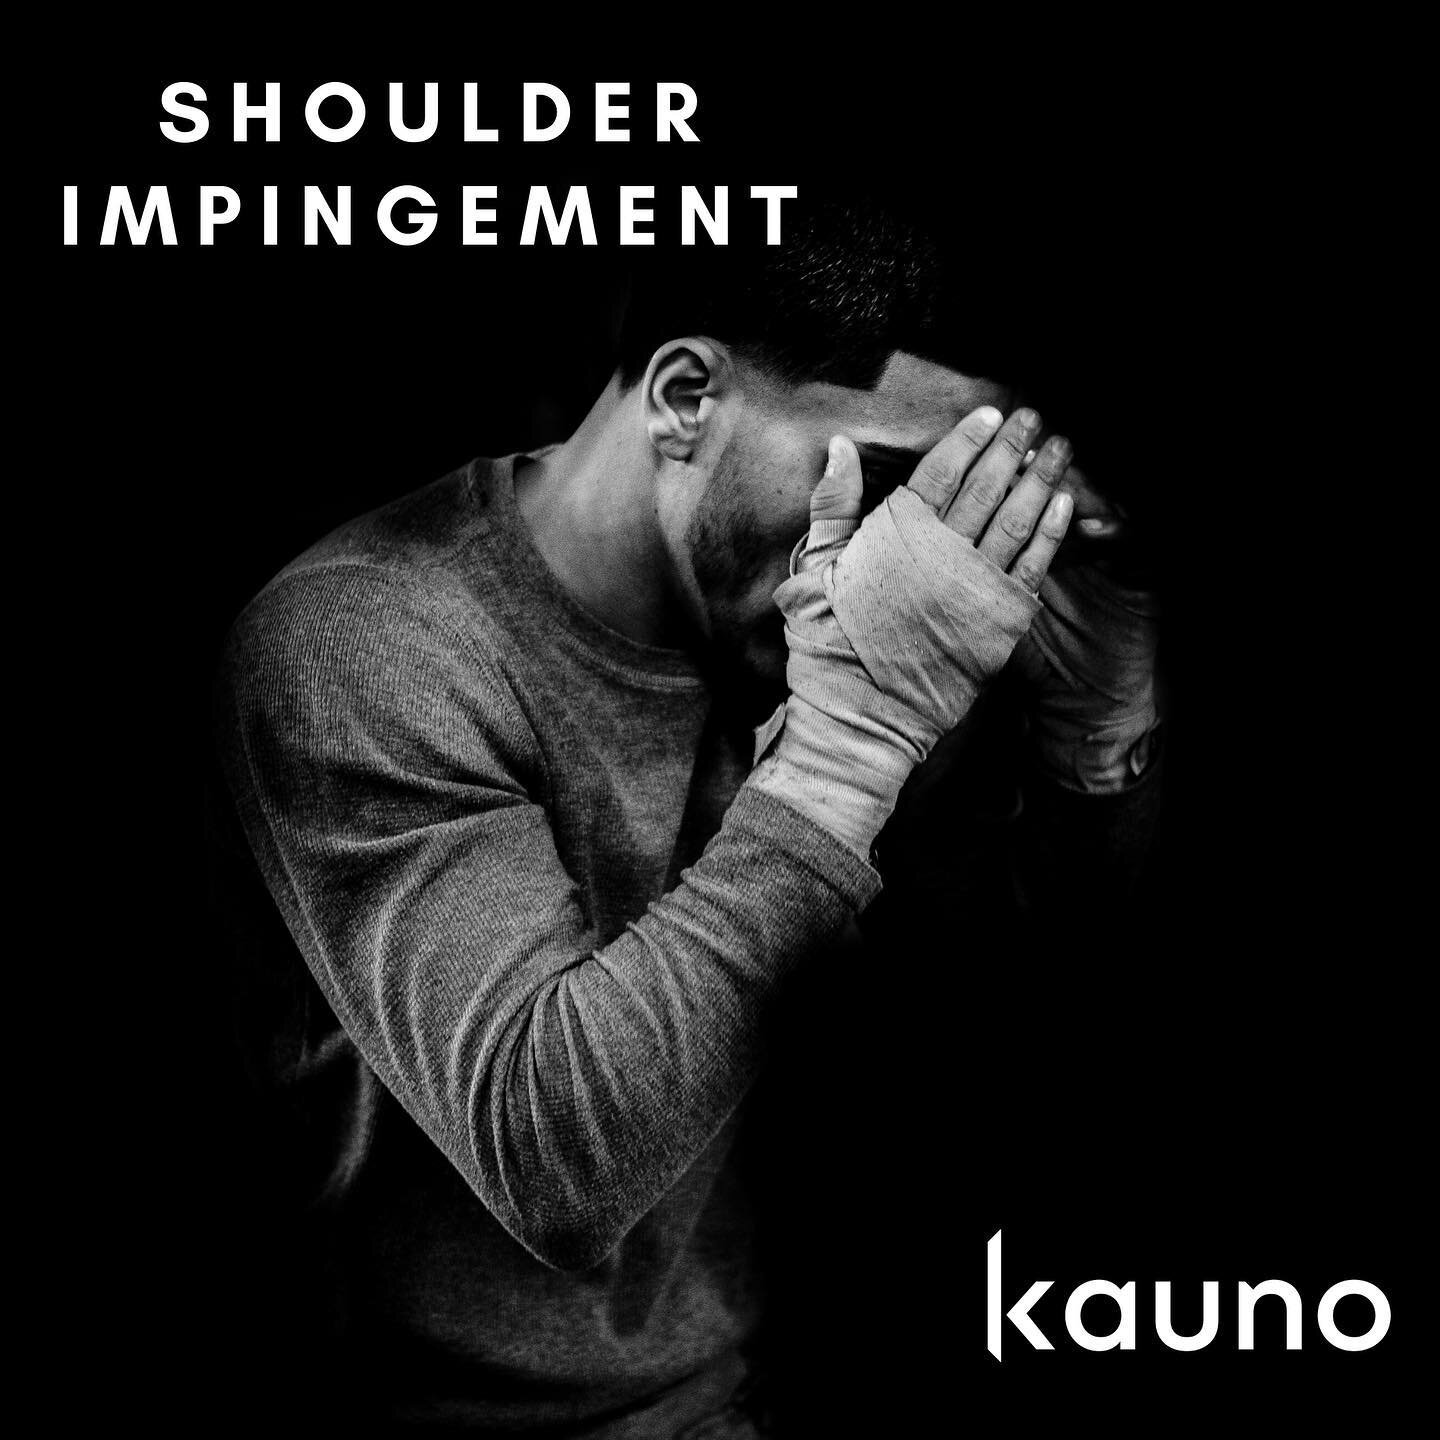 [Blog in Bio] Shoulder Impingement Syndrome is one if the most common causes of shoulder pain. What is it? Why does it happen? What can you do? Link in bio.